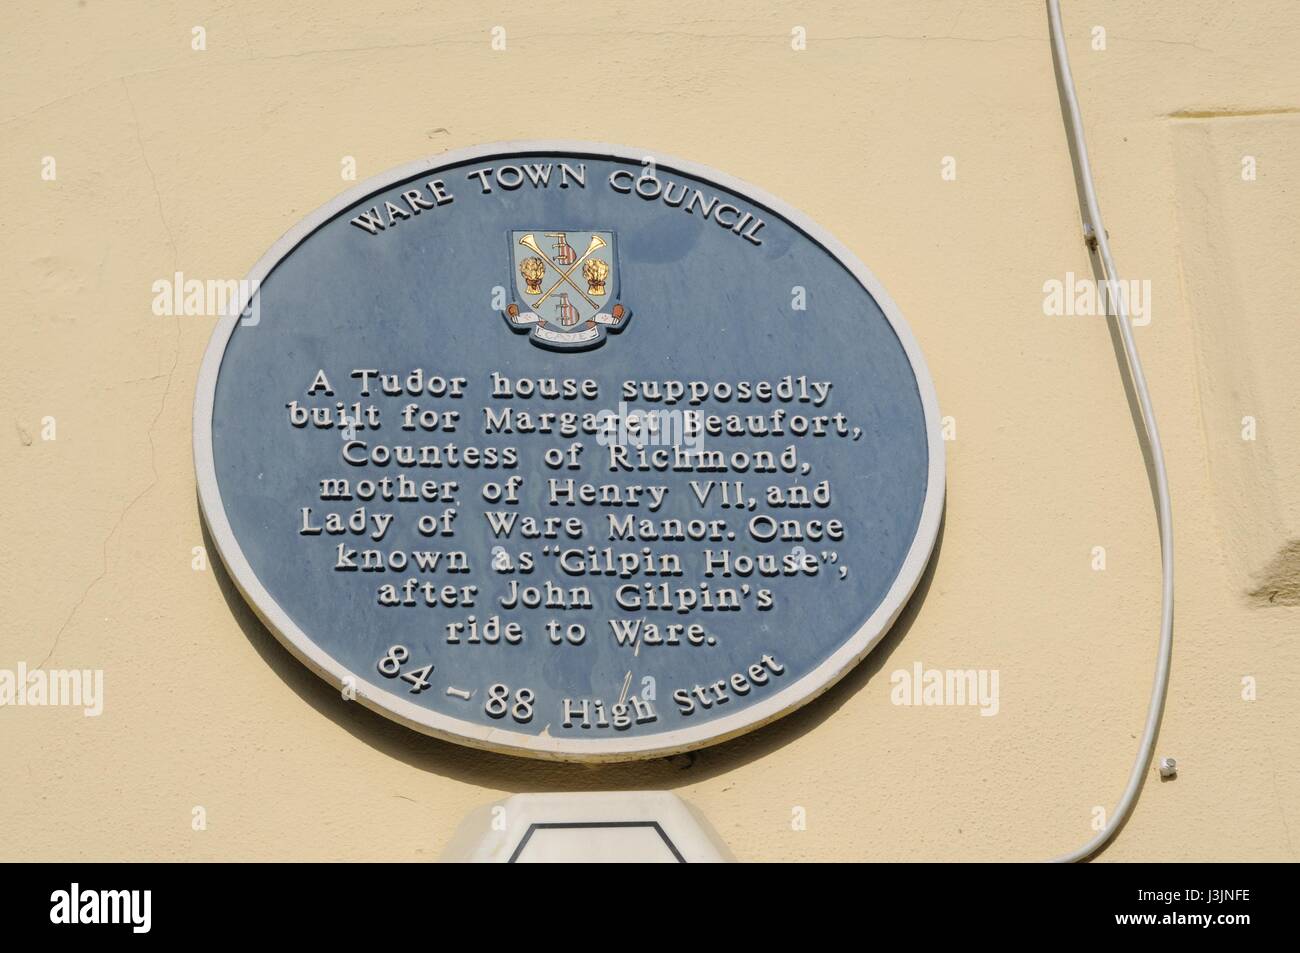 Plaque on 84-88 High Street,  Ware, Hertfordshire. “Gilpin House” is a reminder of John Gilpin’s ride in William Cowper’s poem Stock Photo